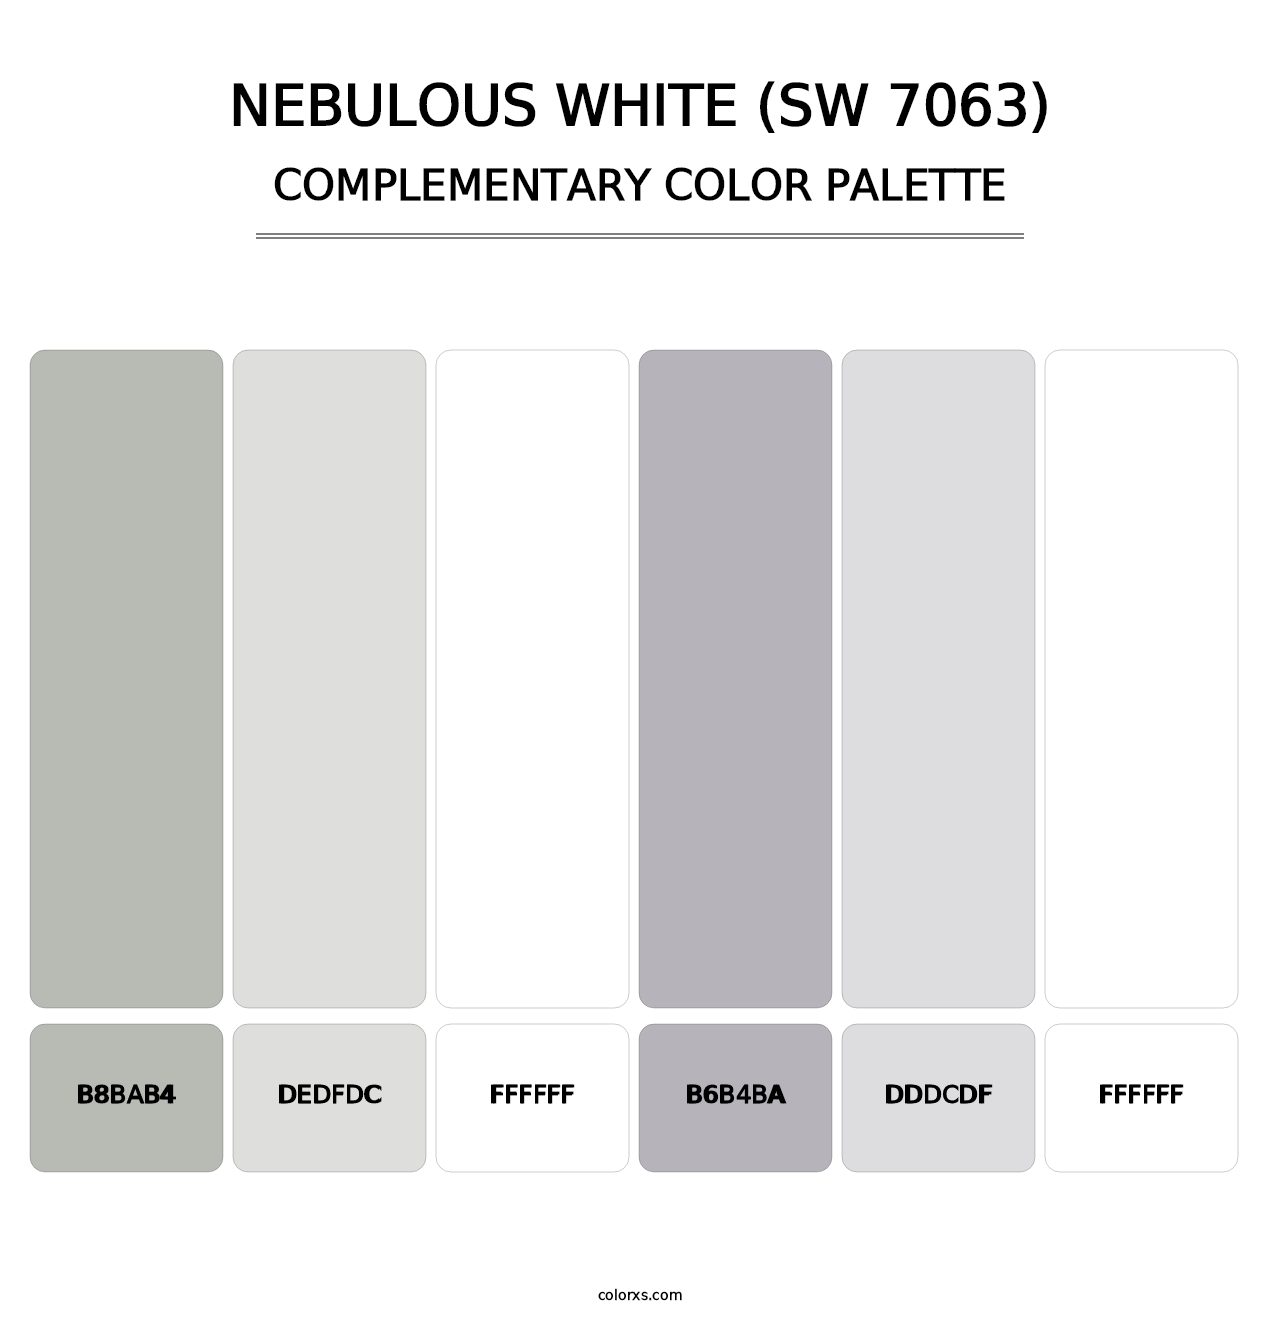 Nebulous White (SW 7063) - Complementary Color Palette